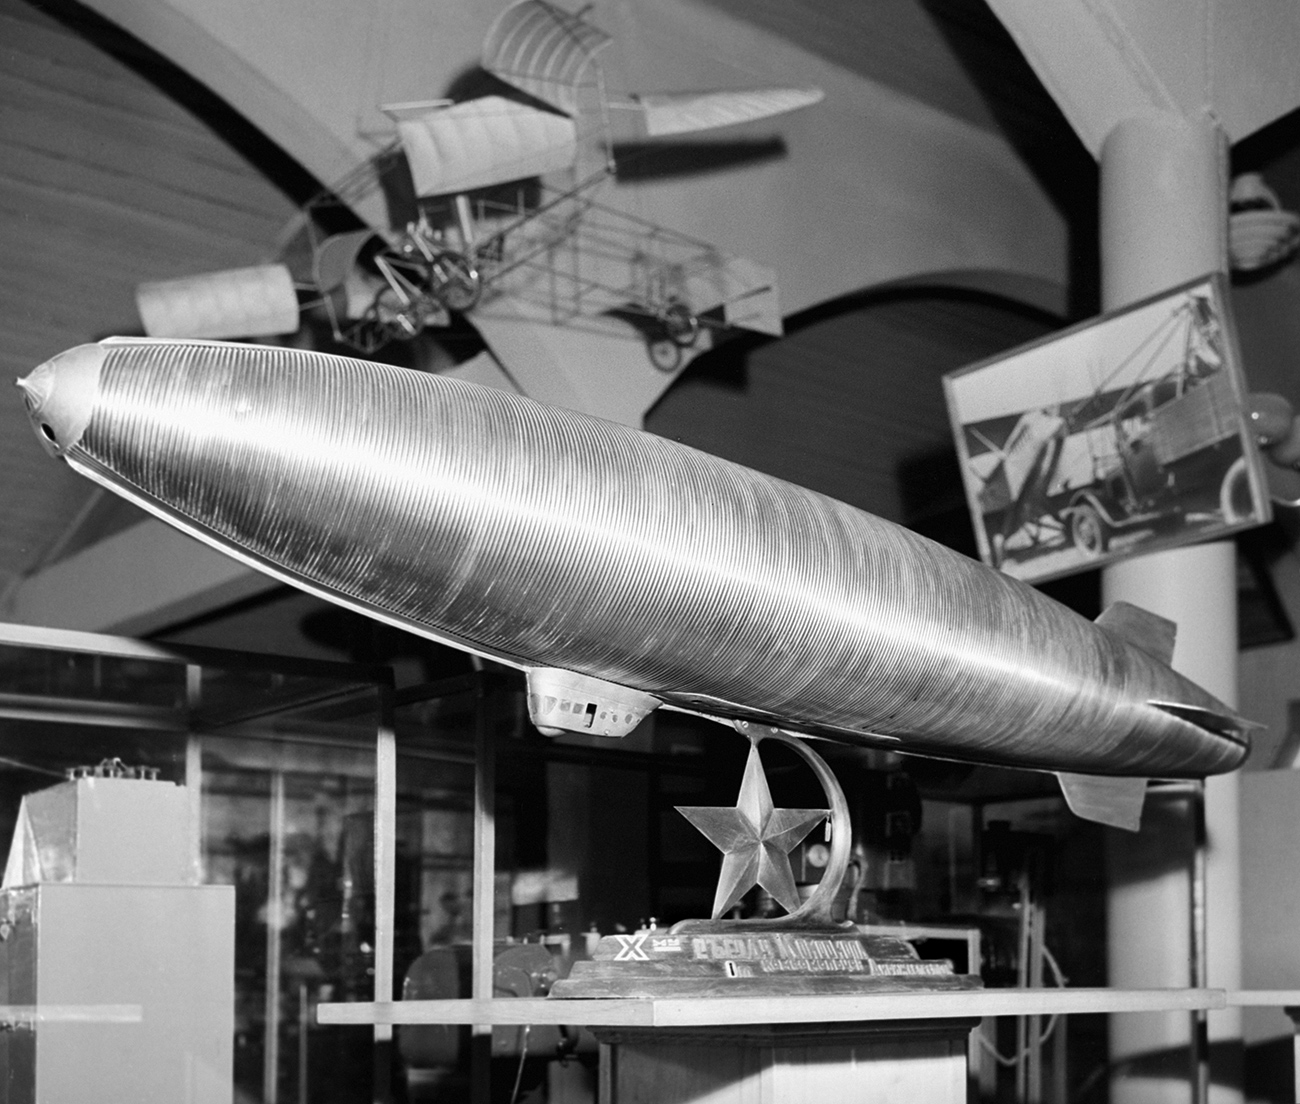 Model of all-metal dirigible designed by Konstantin Tsiolkovsky [1857-1935] on display at the Museum of the Yury Gagarin Order of the Red Banner and Order of Kutuzov Air Force Academy.